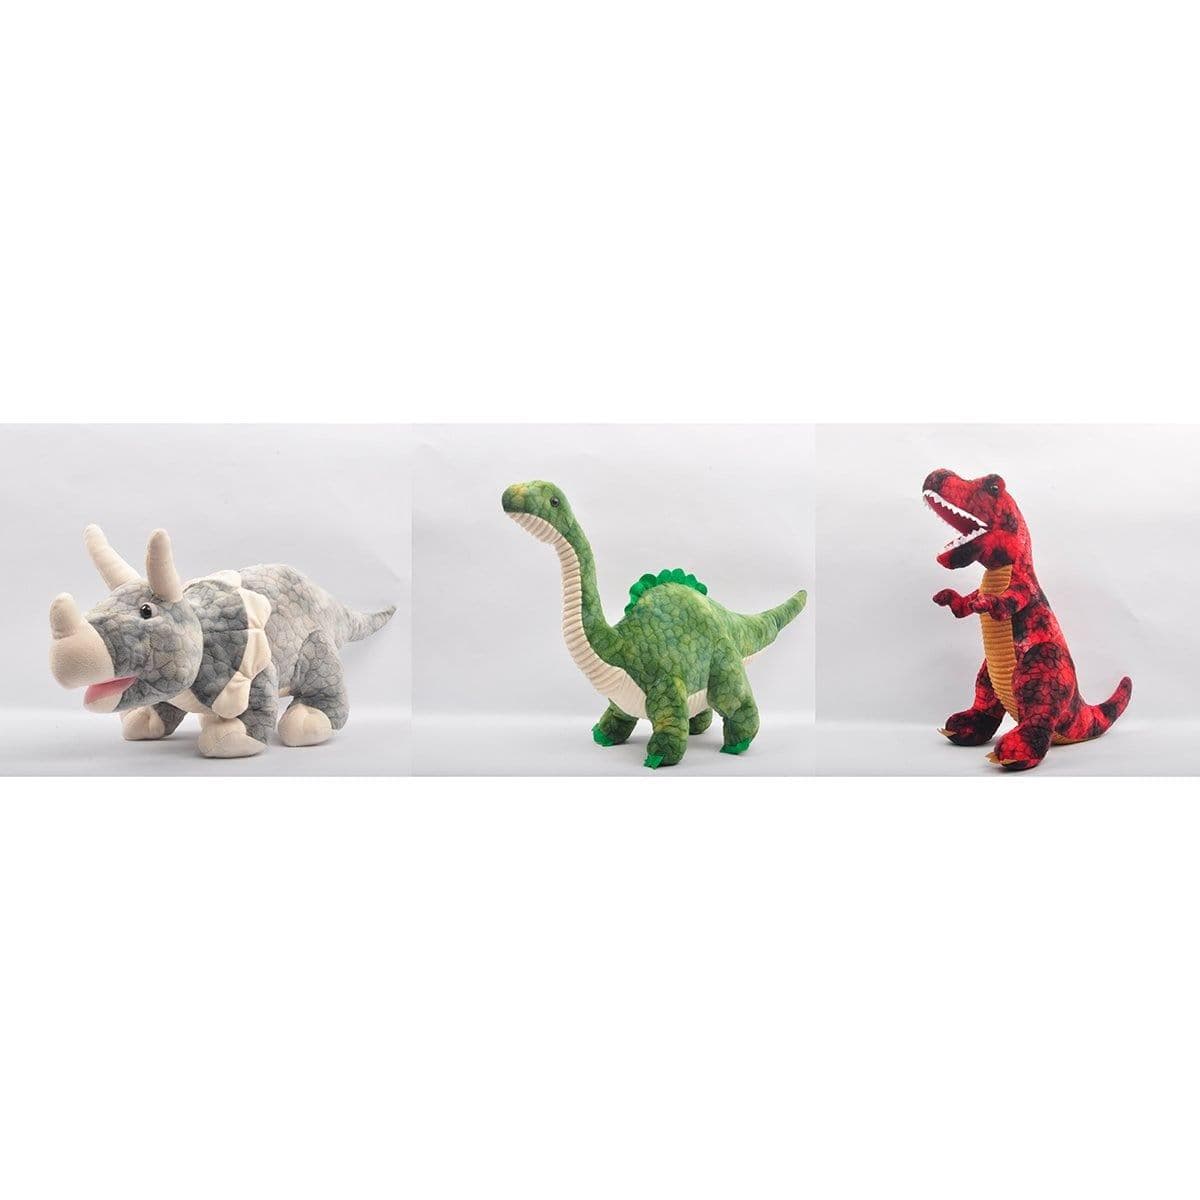 Buy Plushes Dino-myte Dinos 21 in. Asst. sold at Party Expert